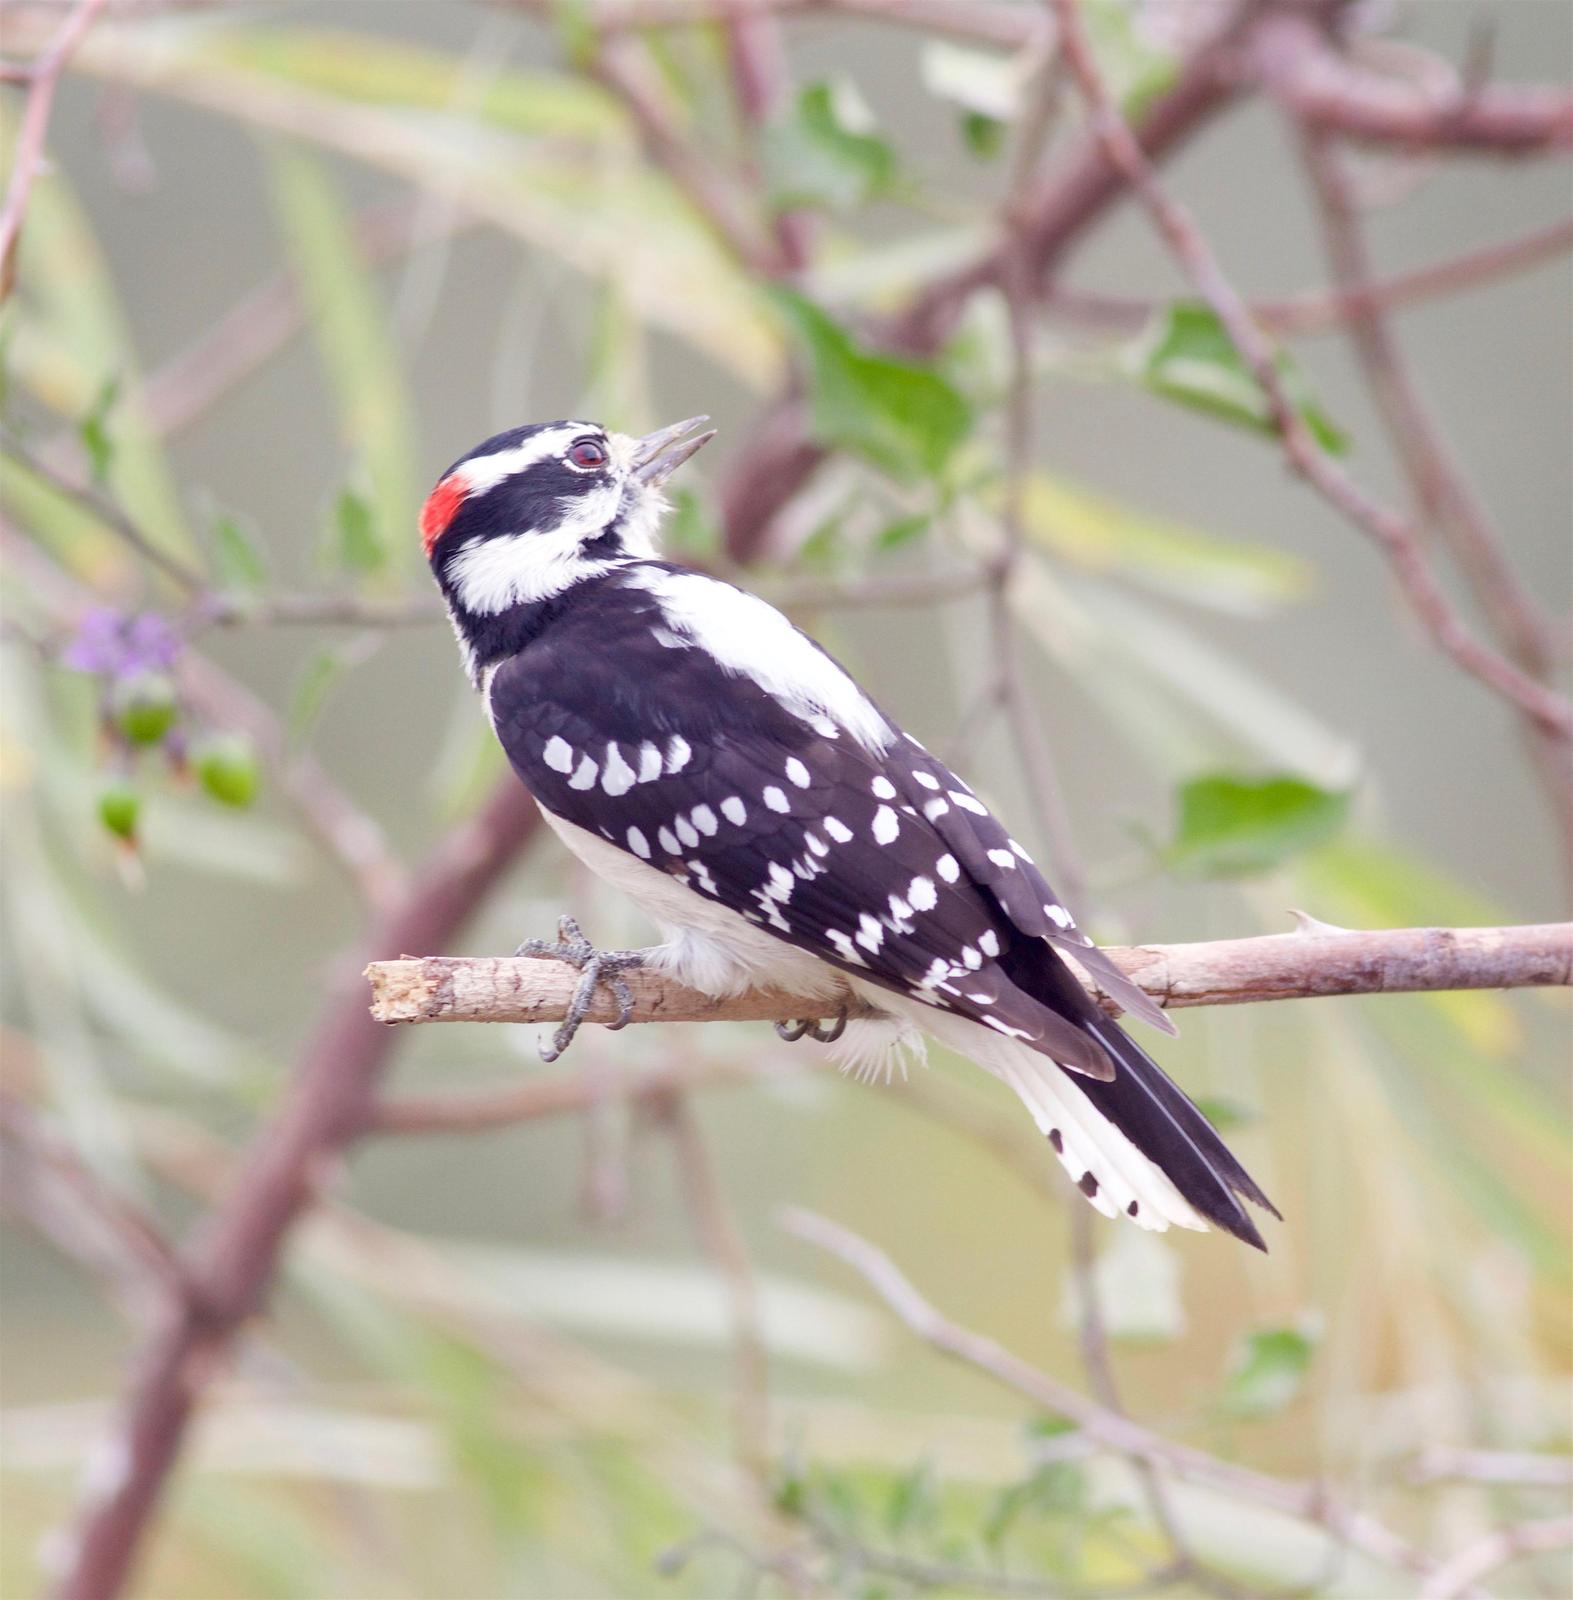 Downy Woodpecker Photo by Kathryn Keith